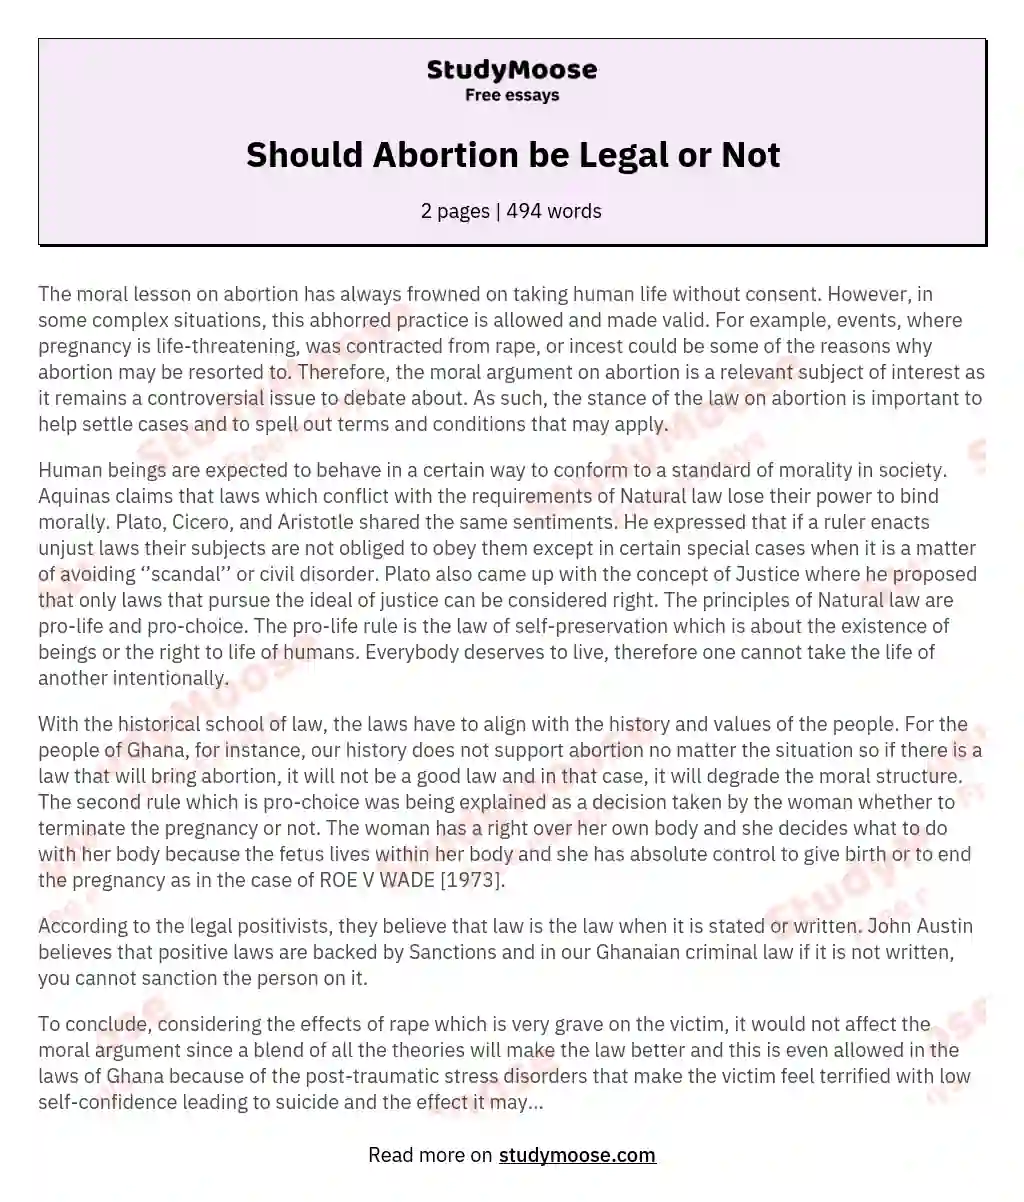 Should Abortion be Legal or Not